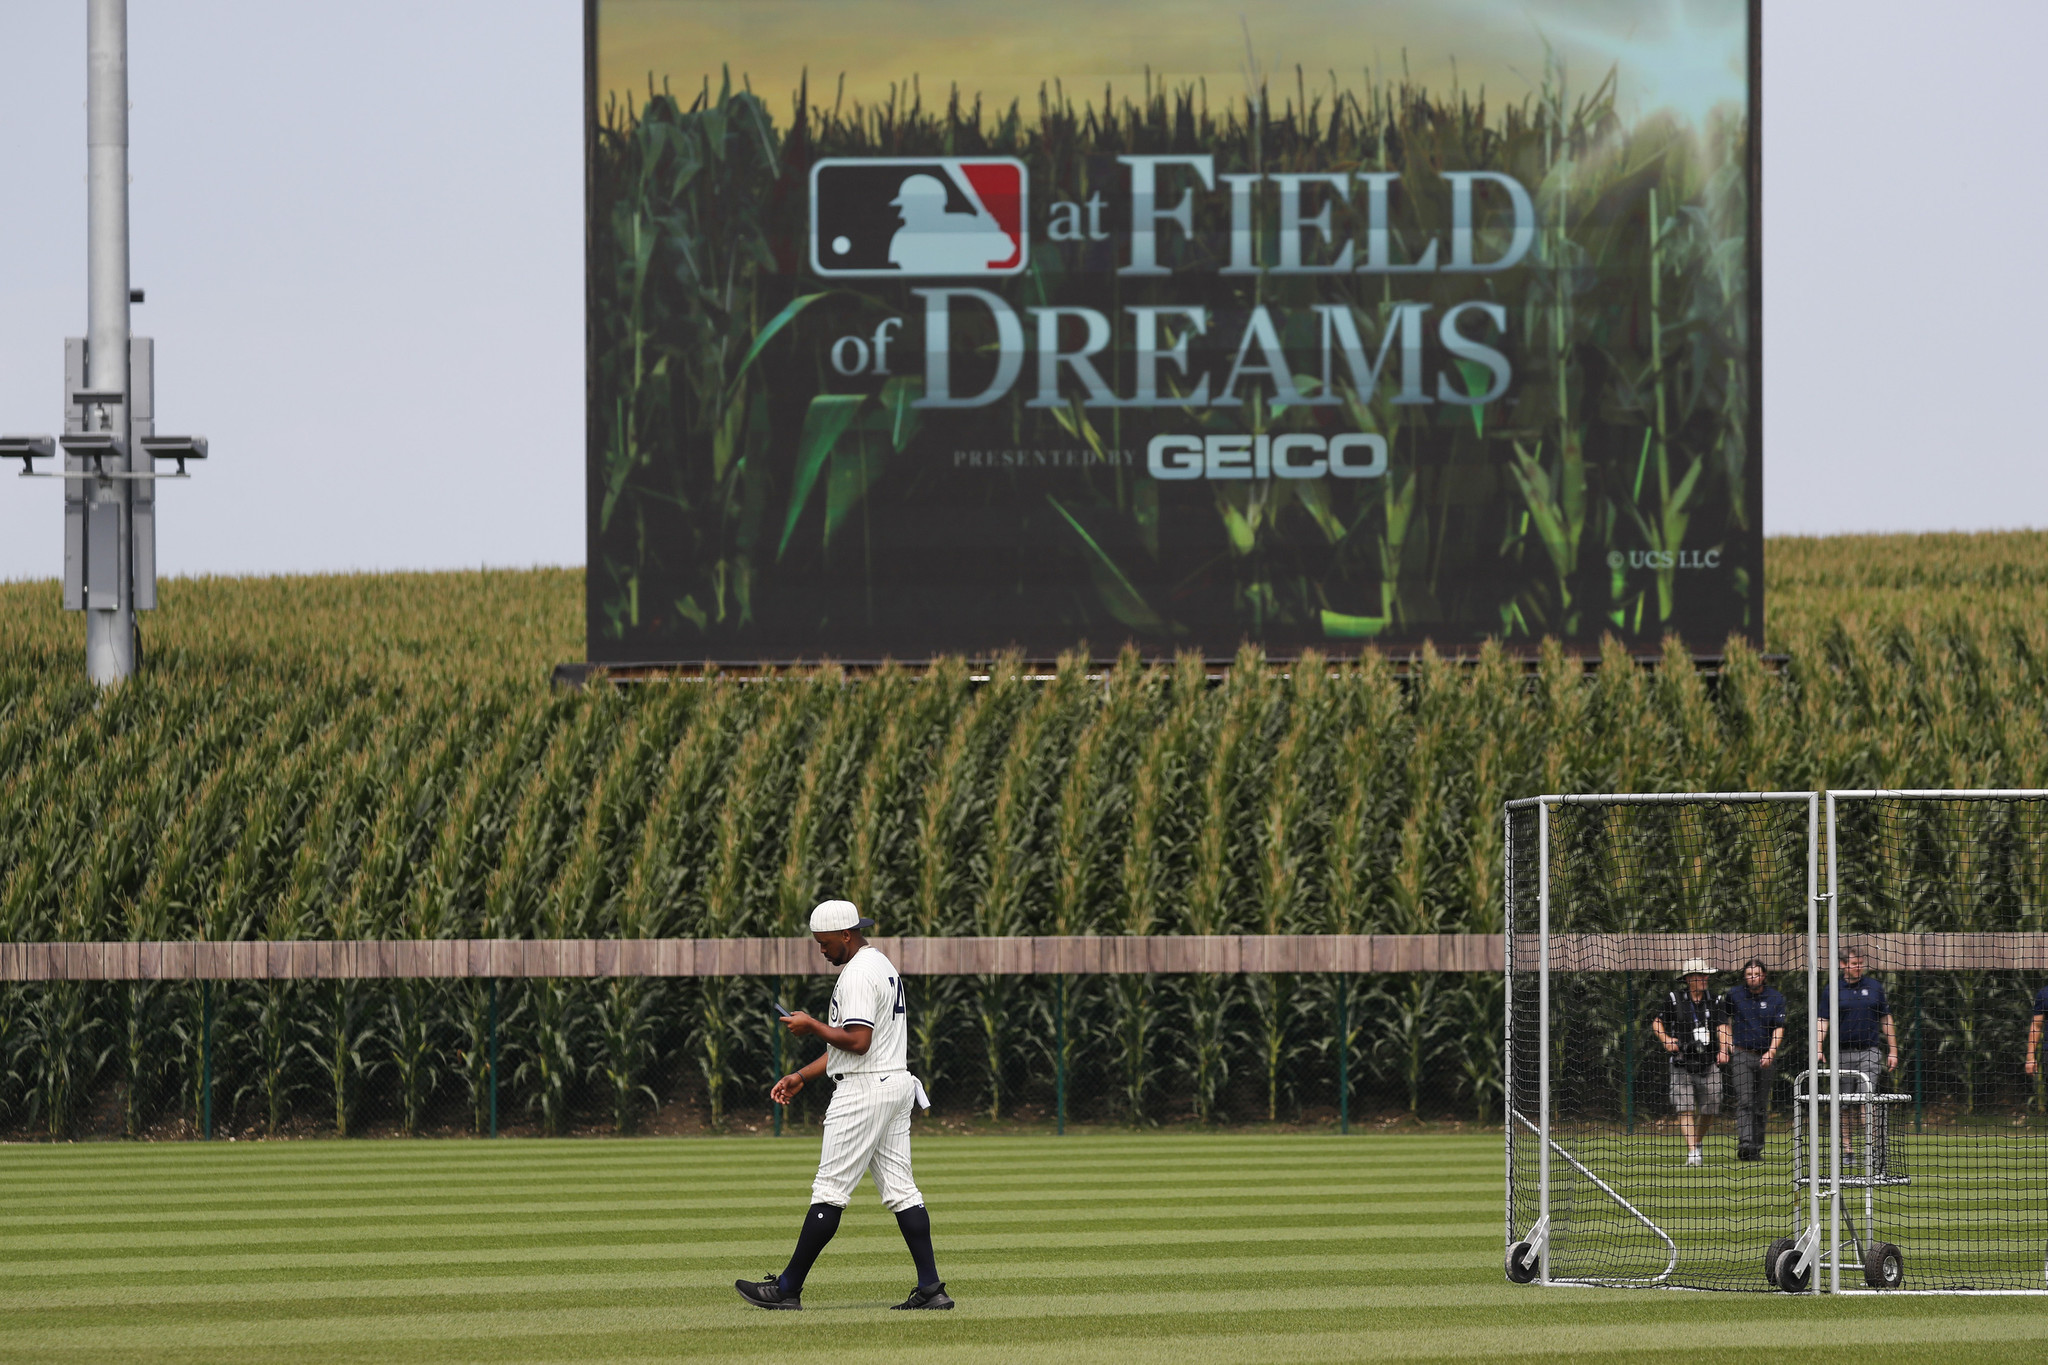 Chicago Cubs, Cincinnati Reds to Play at Field of Dreams Site in 2022 – NBC  Chicago